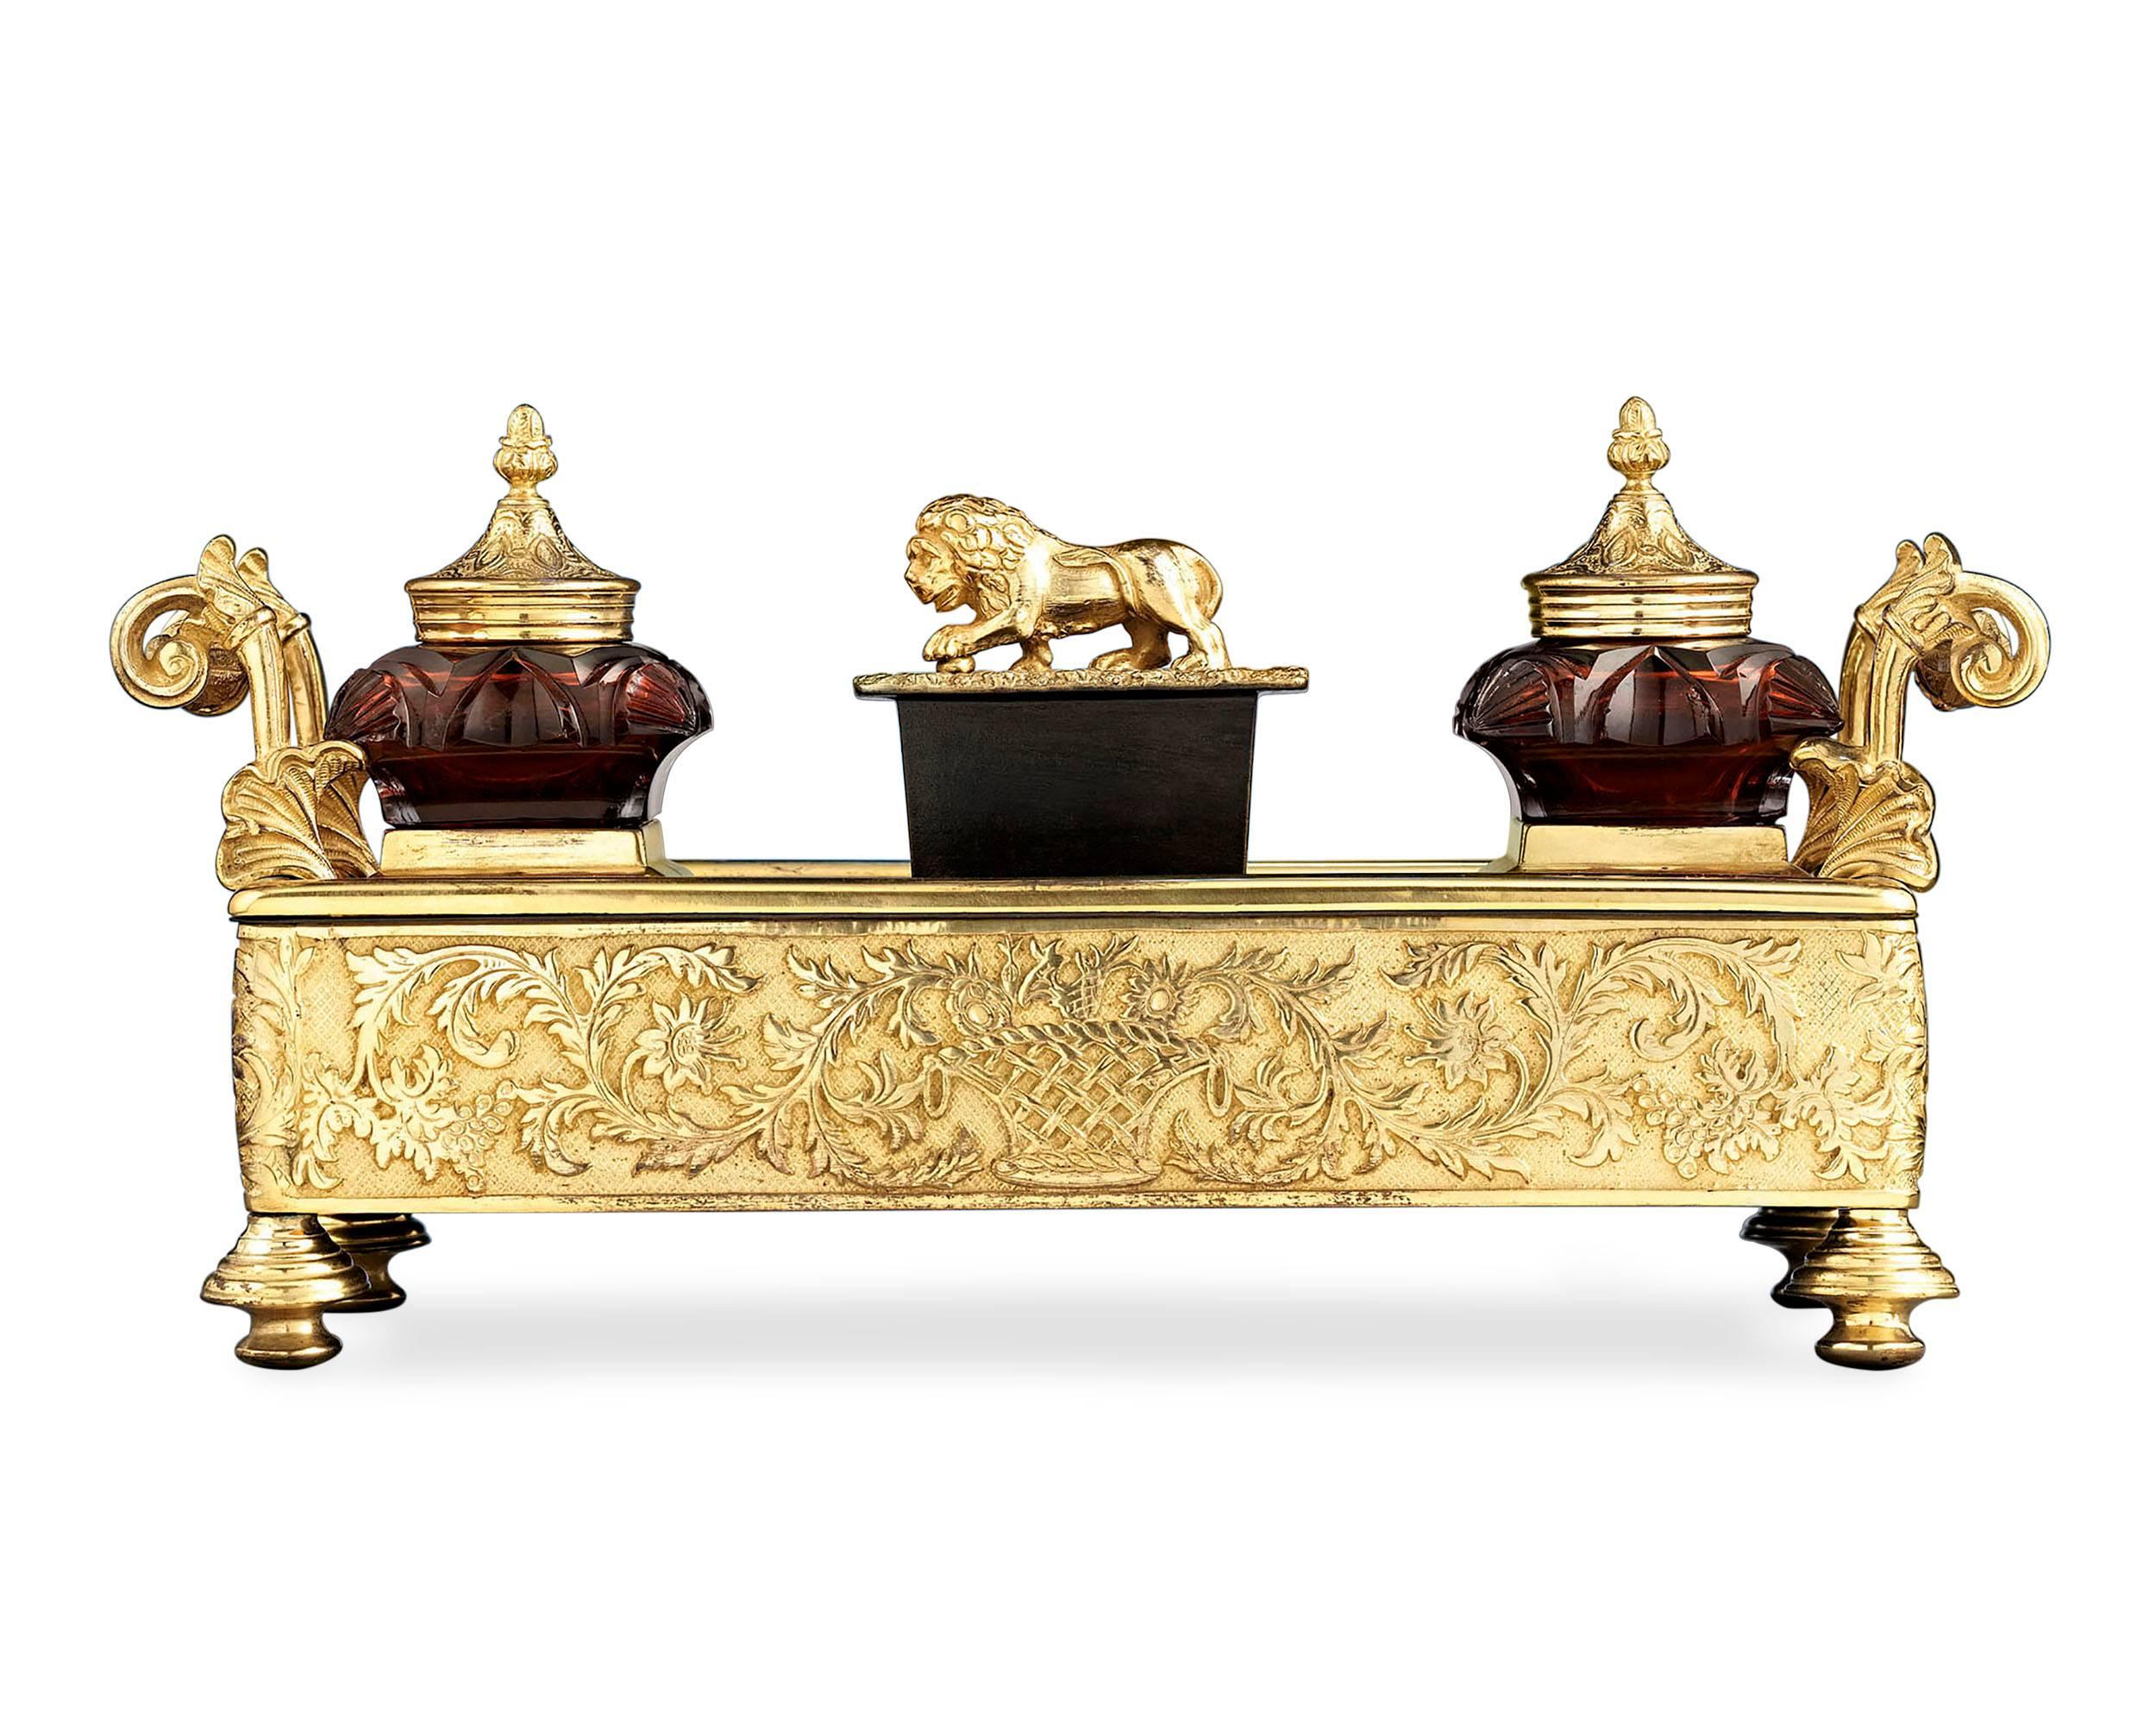 Fine bronze ormolu is beautifully contrasted by cranberry cut-glass in this Regency-period inkwell. This elegant desk accessory features a pair of removable glass inkwells, a wafer box surmounted by a gilt lion finial and a pen tray adorned with a